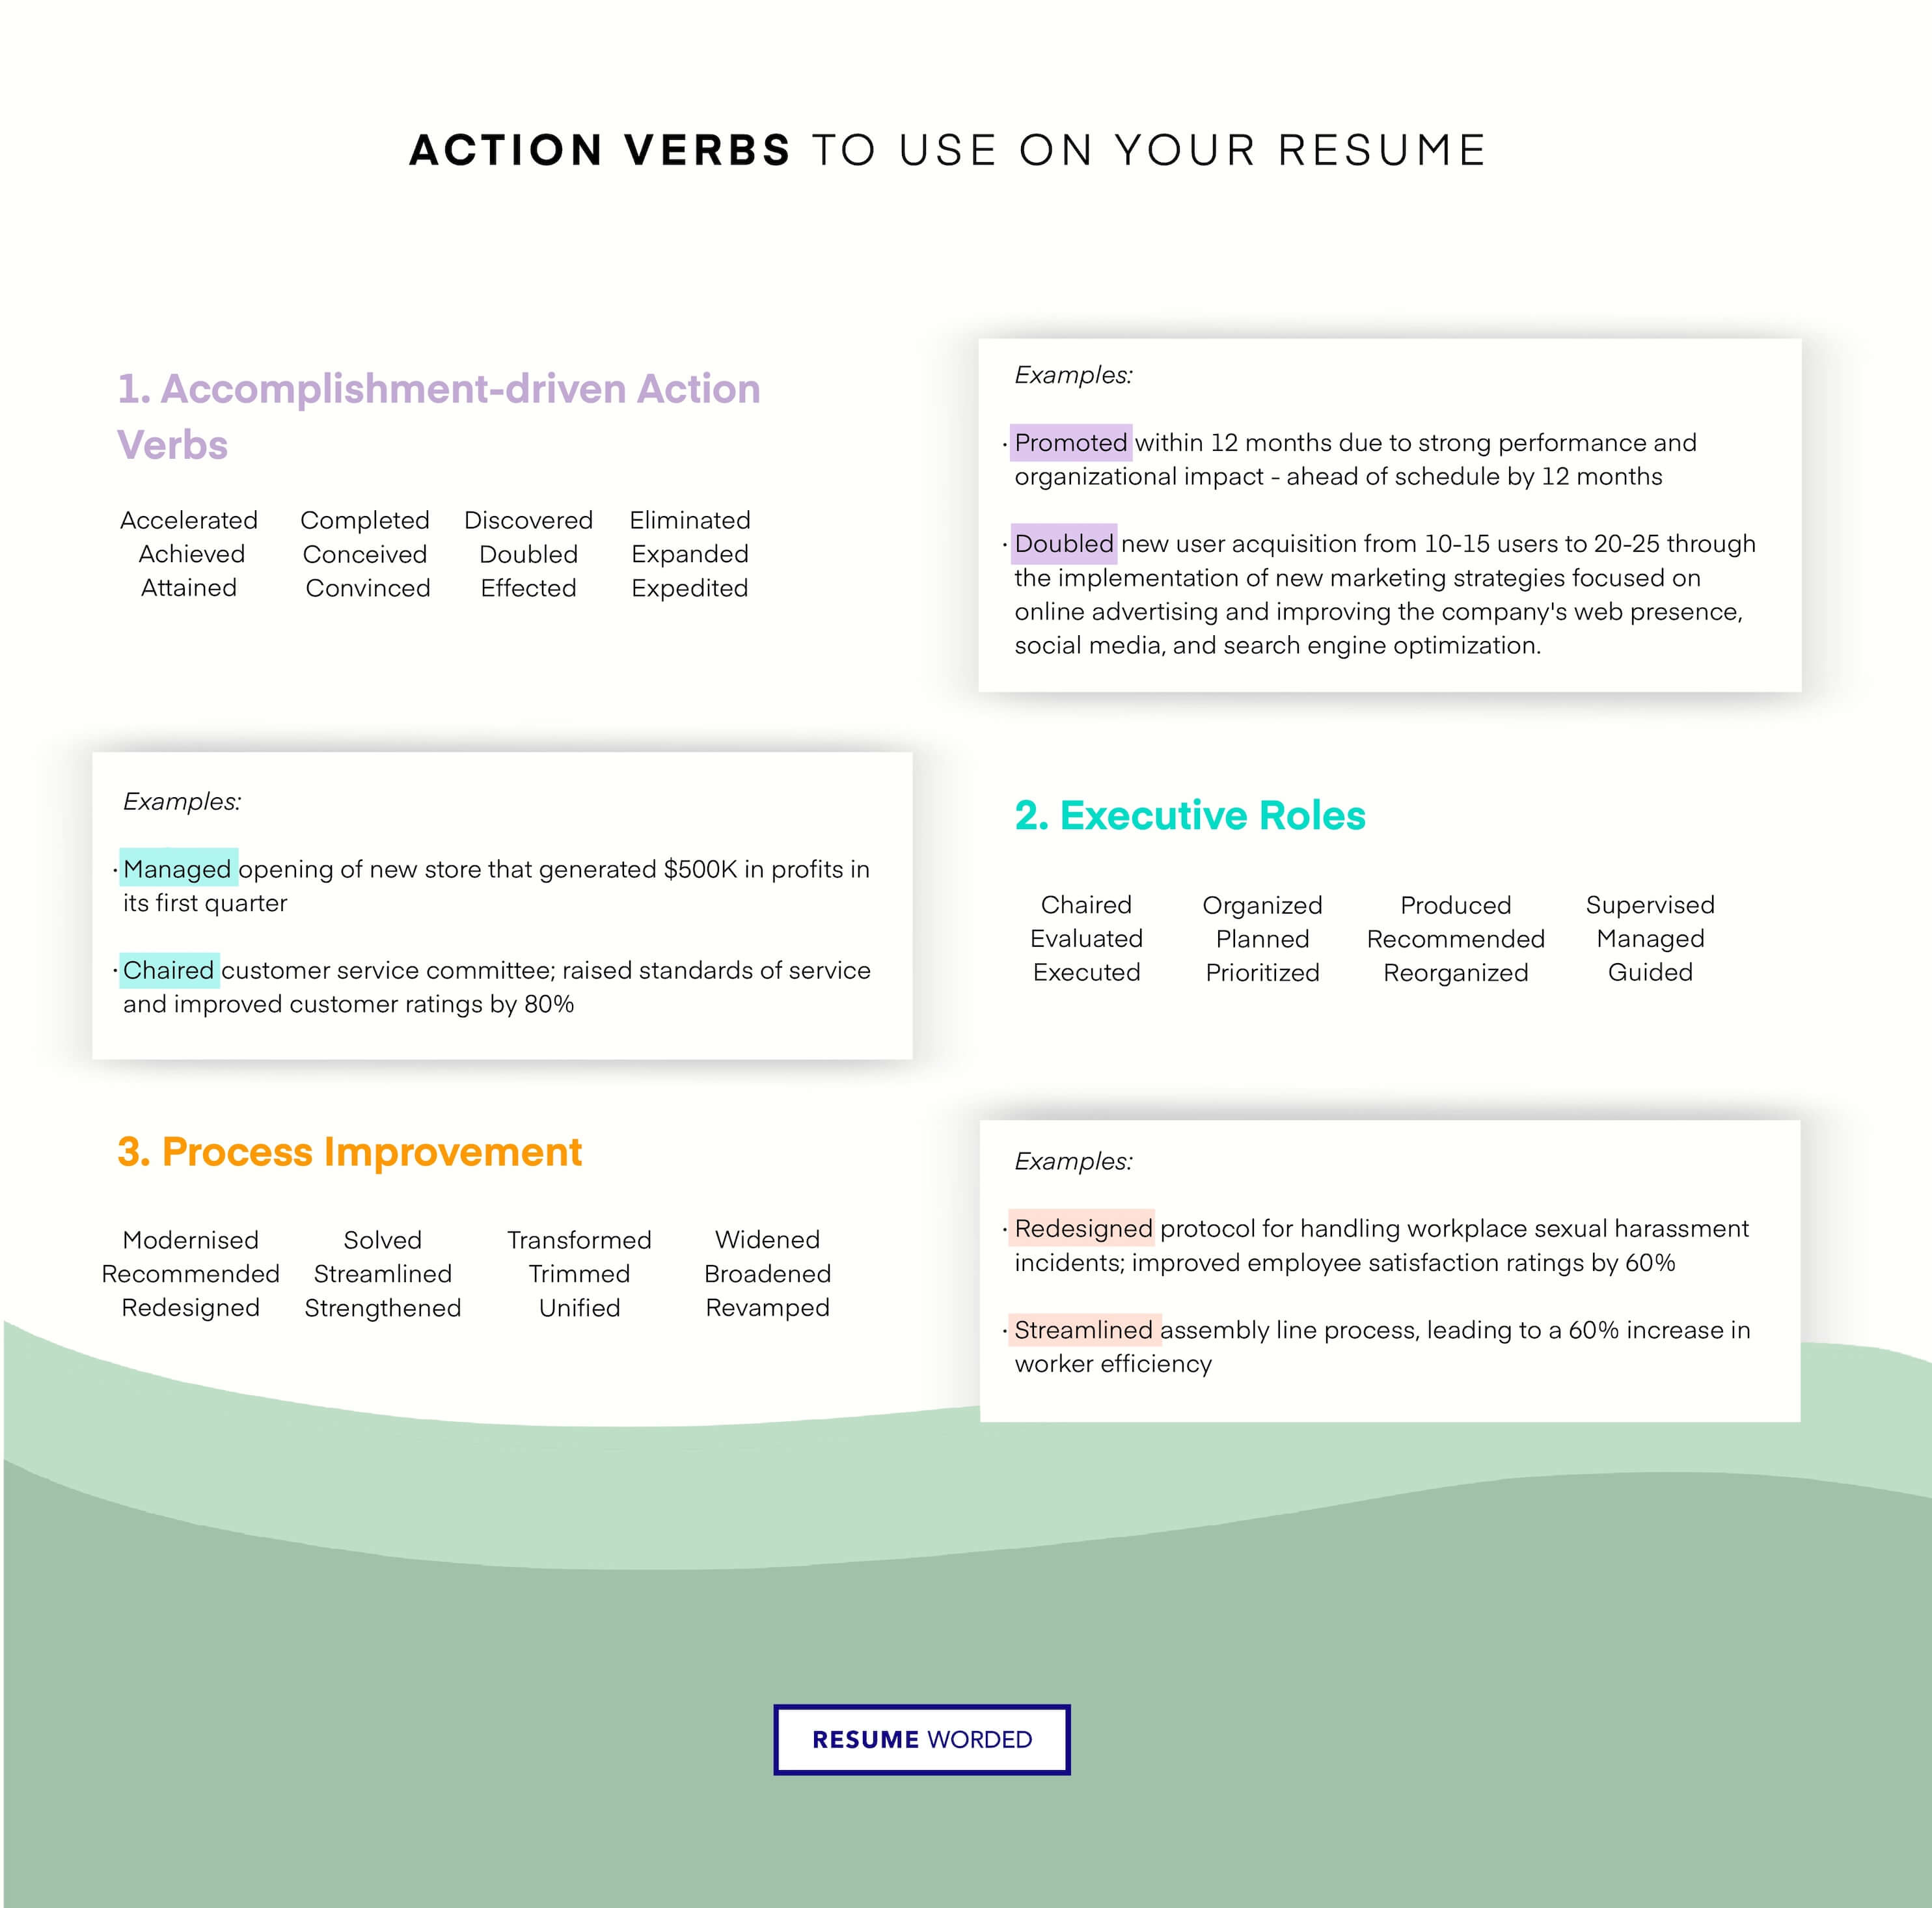 Good use of action verbs - Marketing Data Analyst Resume